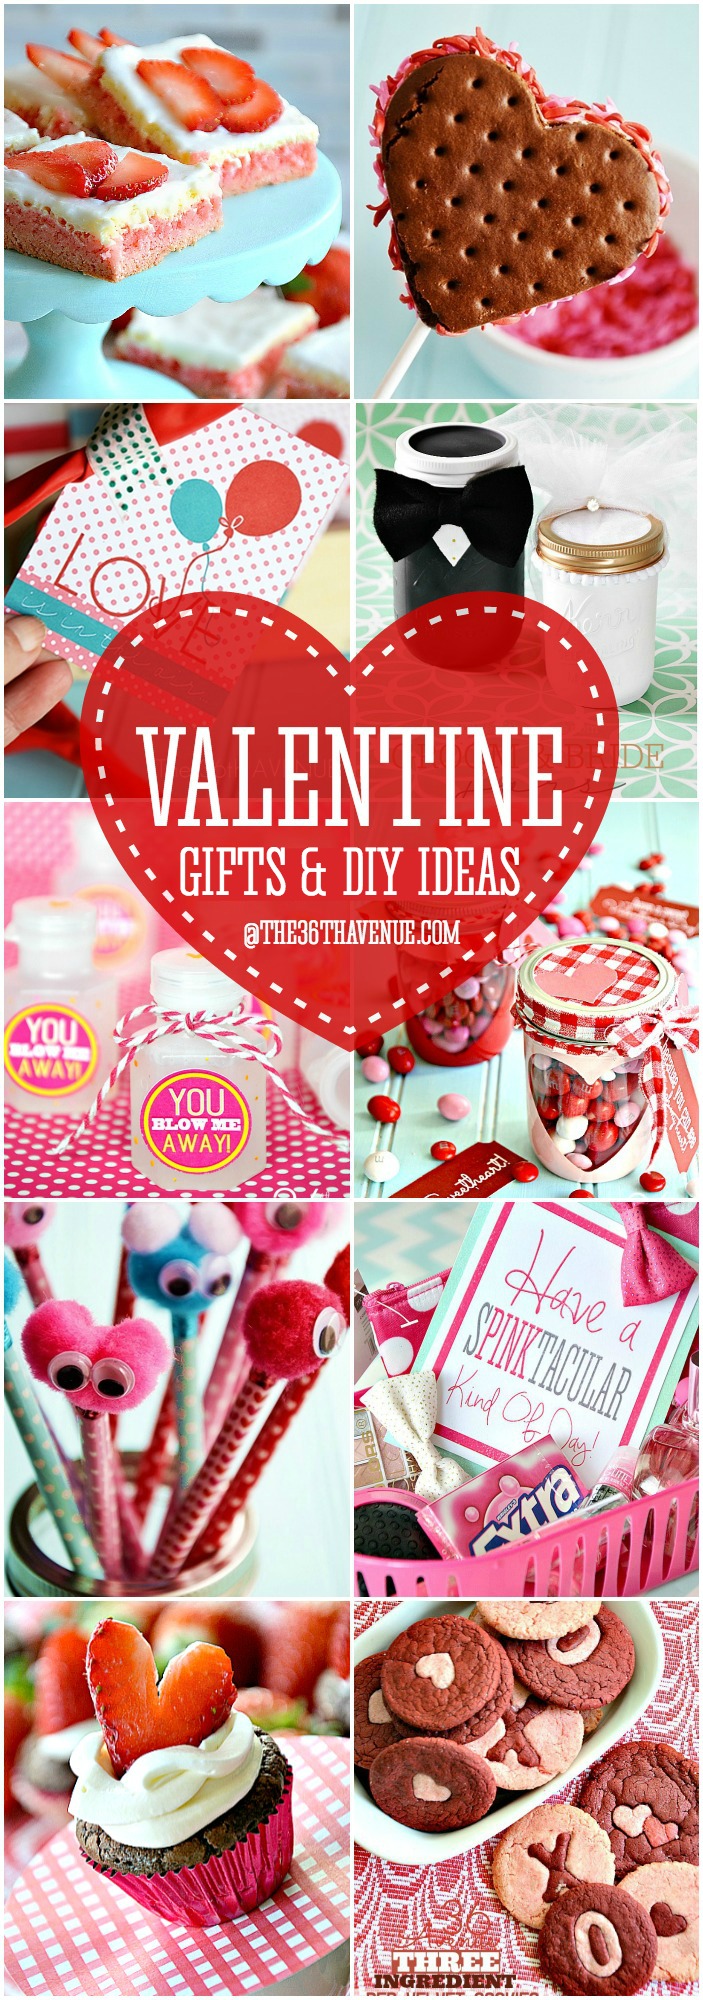 Valentine Gifts and DIY Ideas at the36thavenue.com